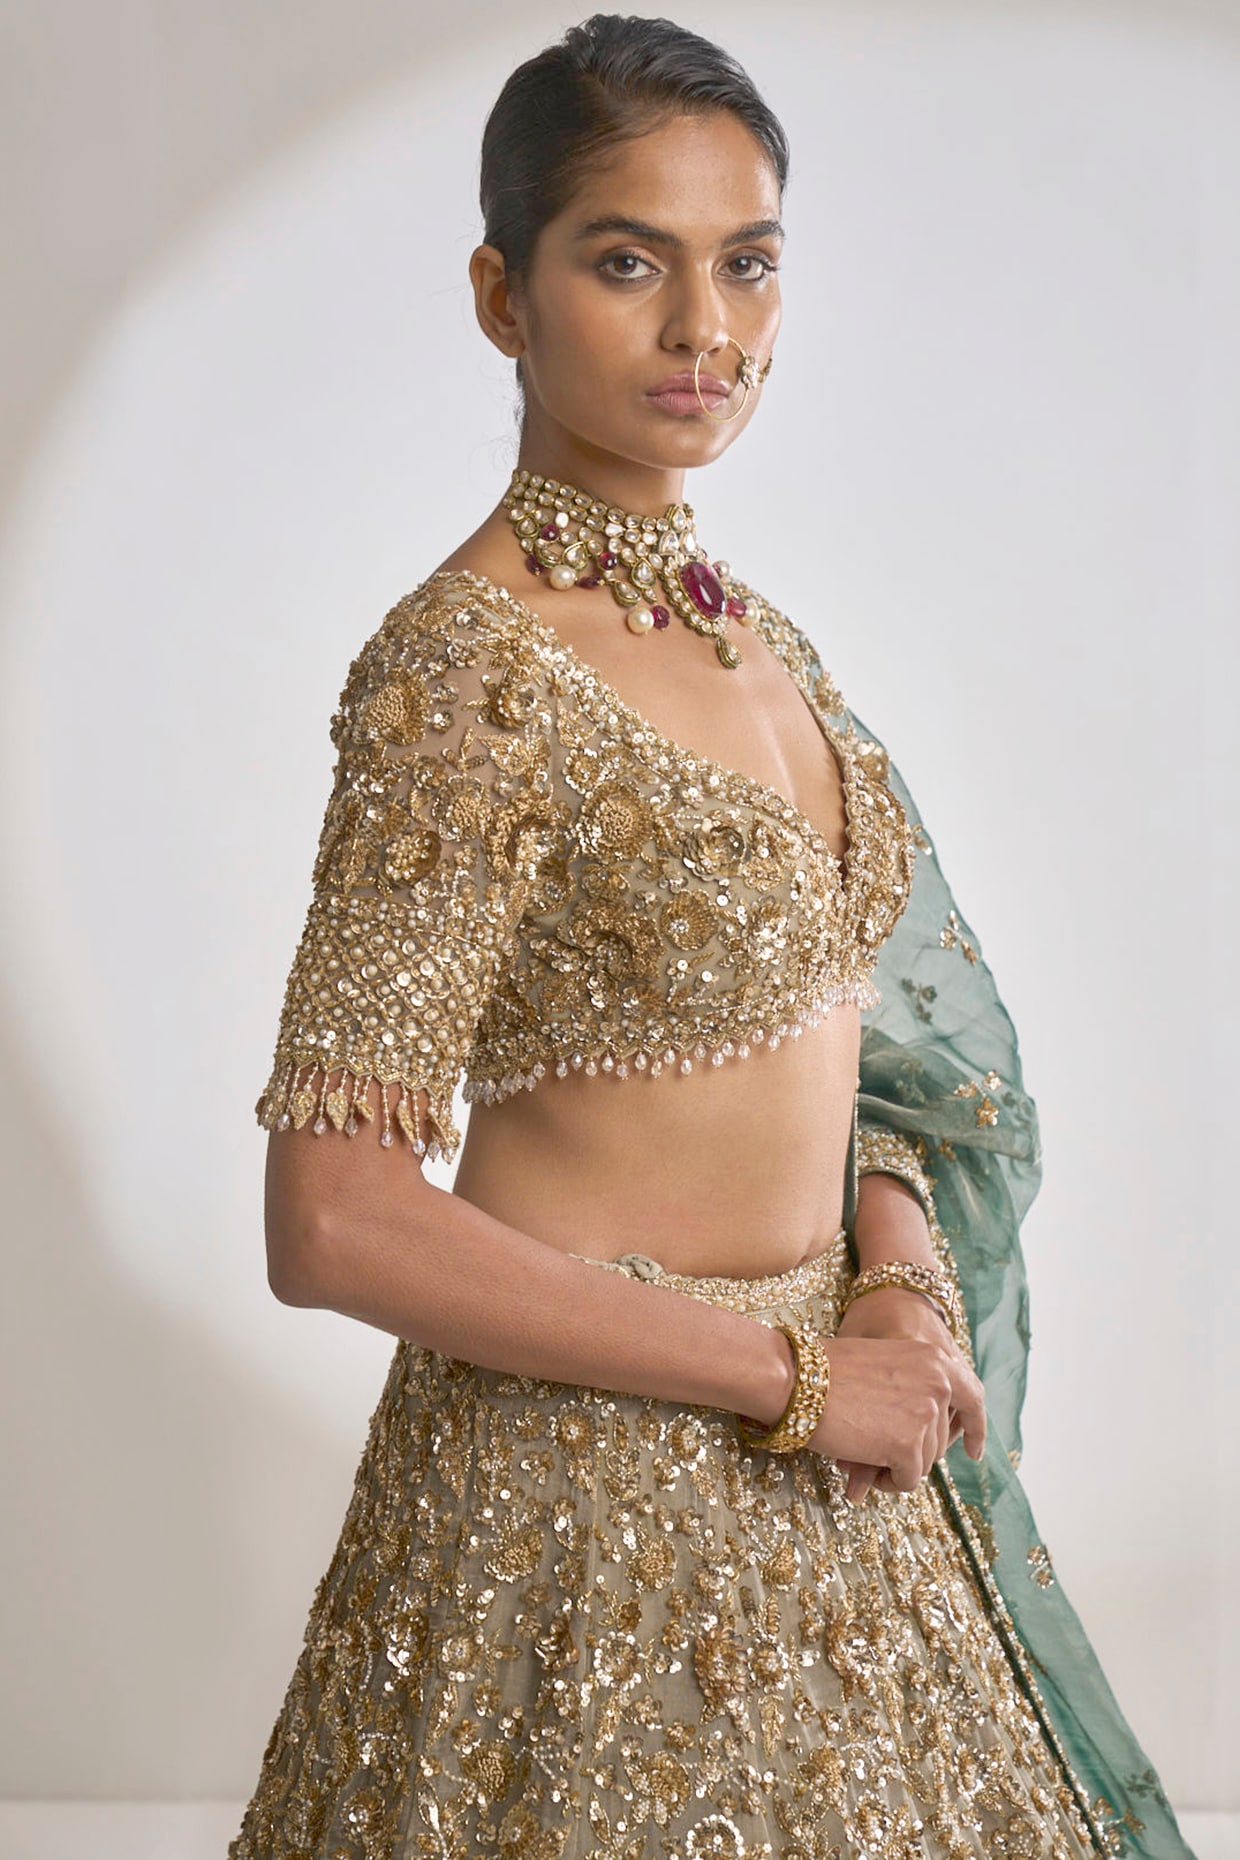 Premium Photo | Stunning indian bride dressed in traditional wedding  clothes lehenga embroidered with gold jewellery